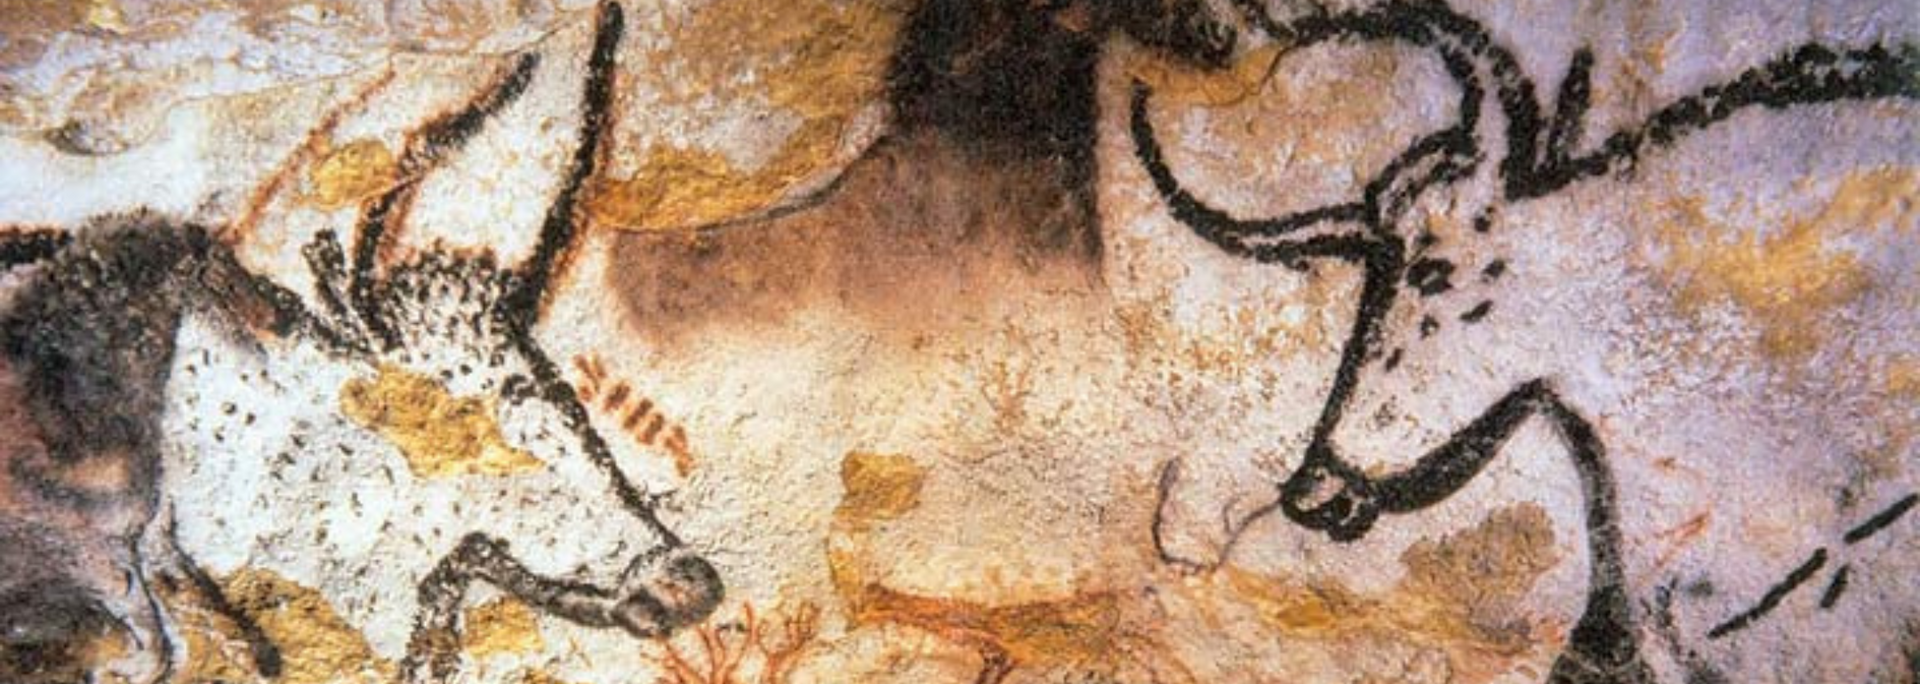 Picture of cave paintings at Lascaux, France.
